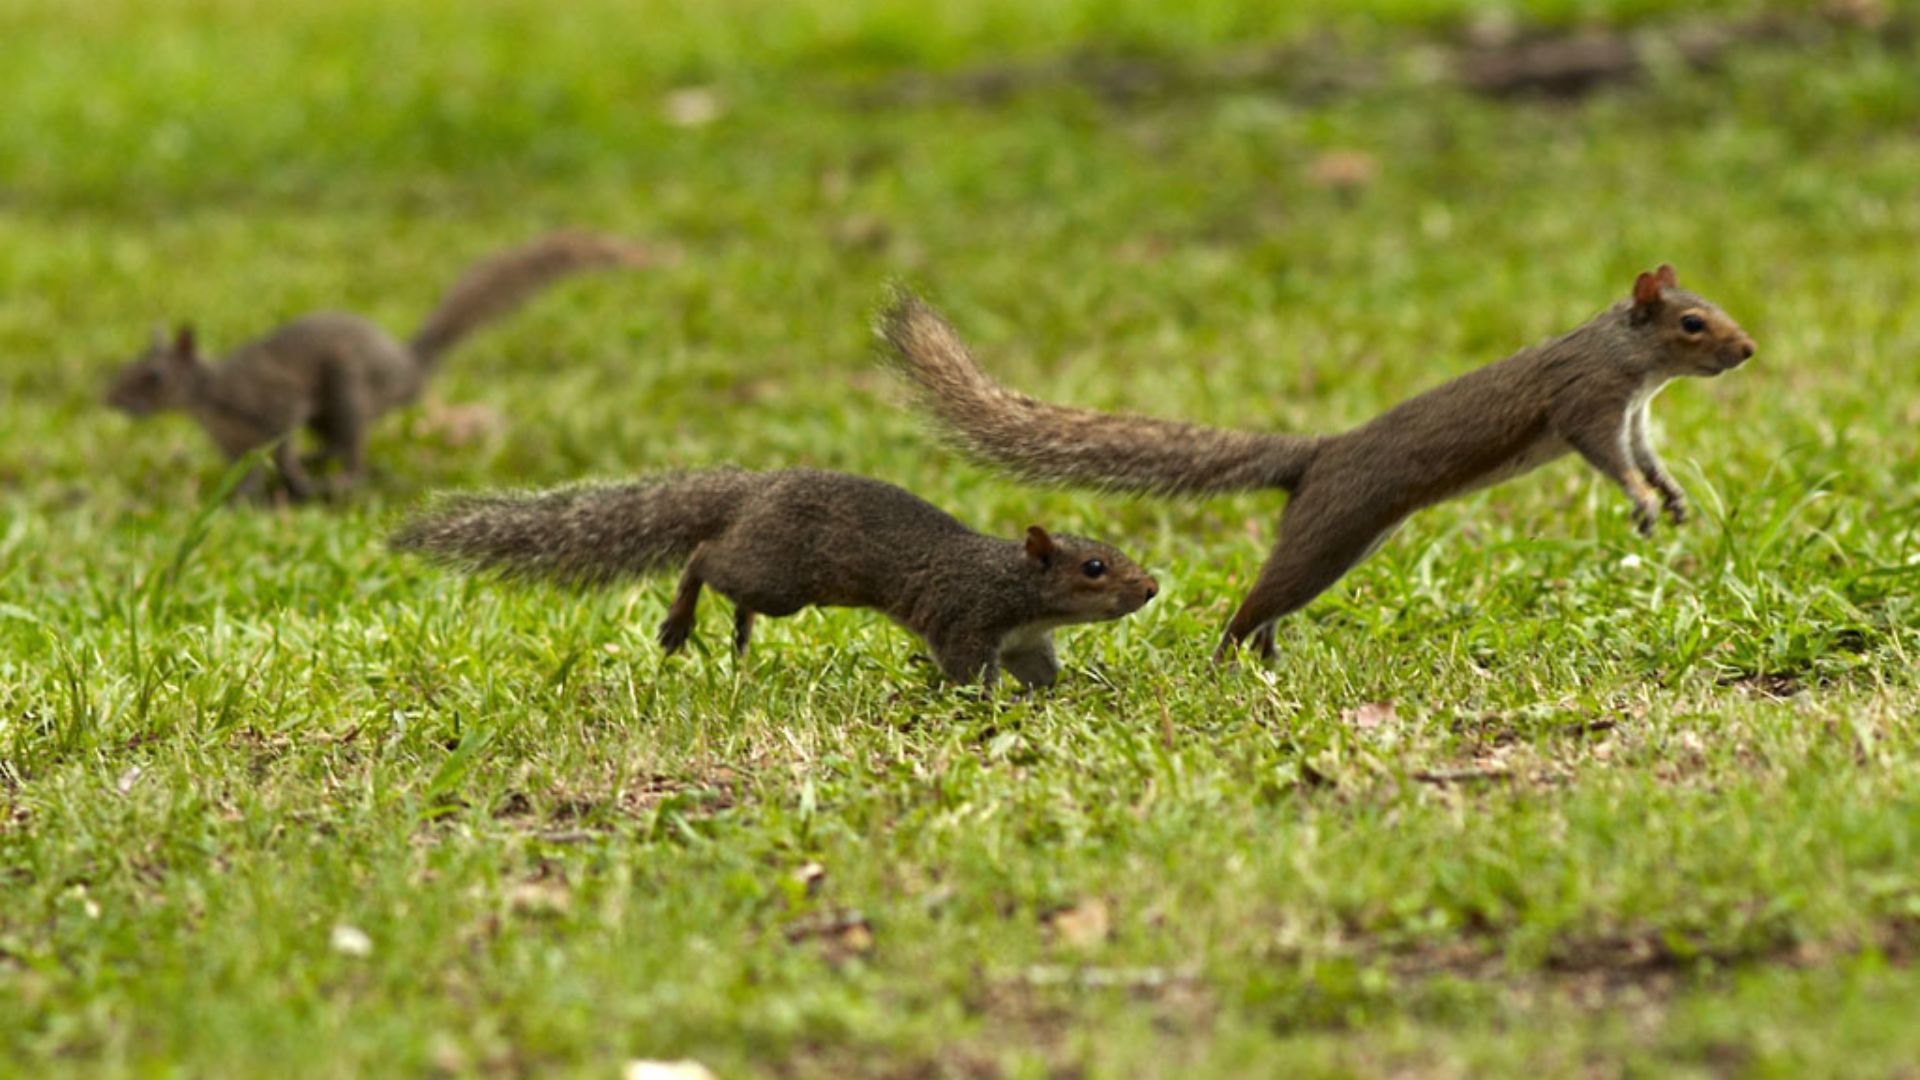 Squirrels playing in the grass